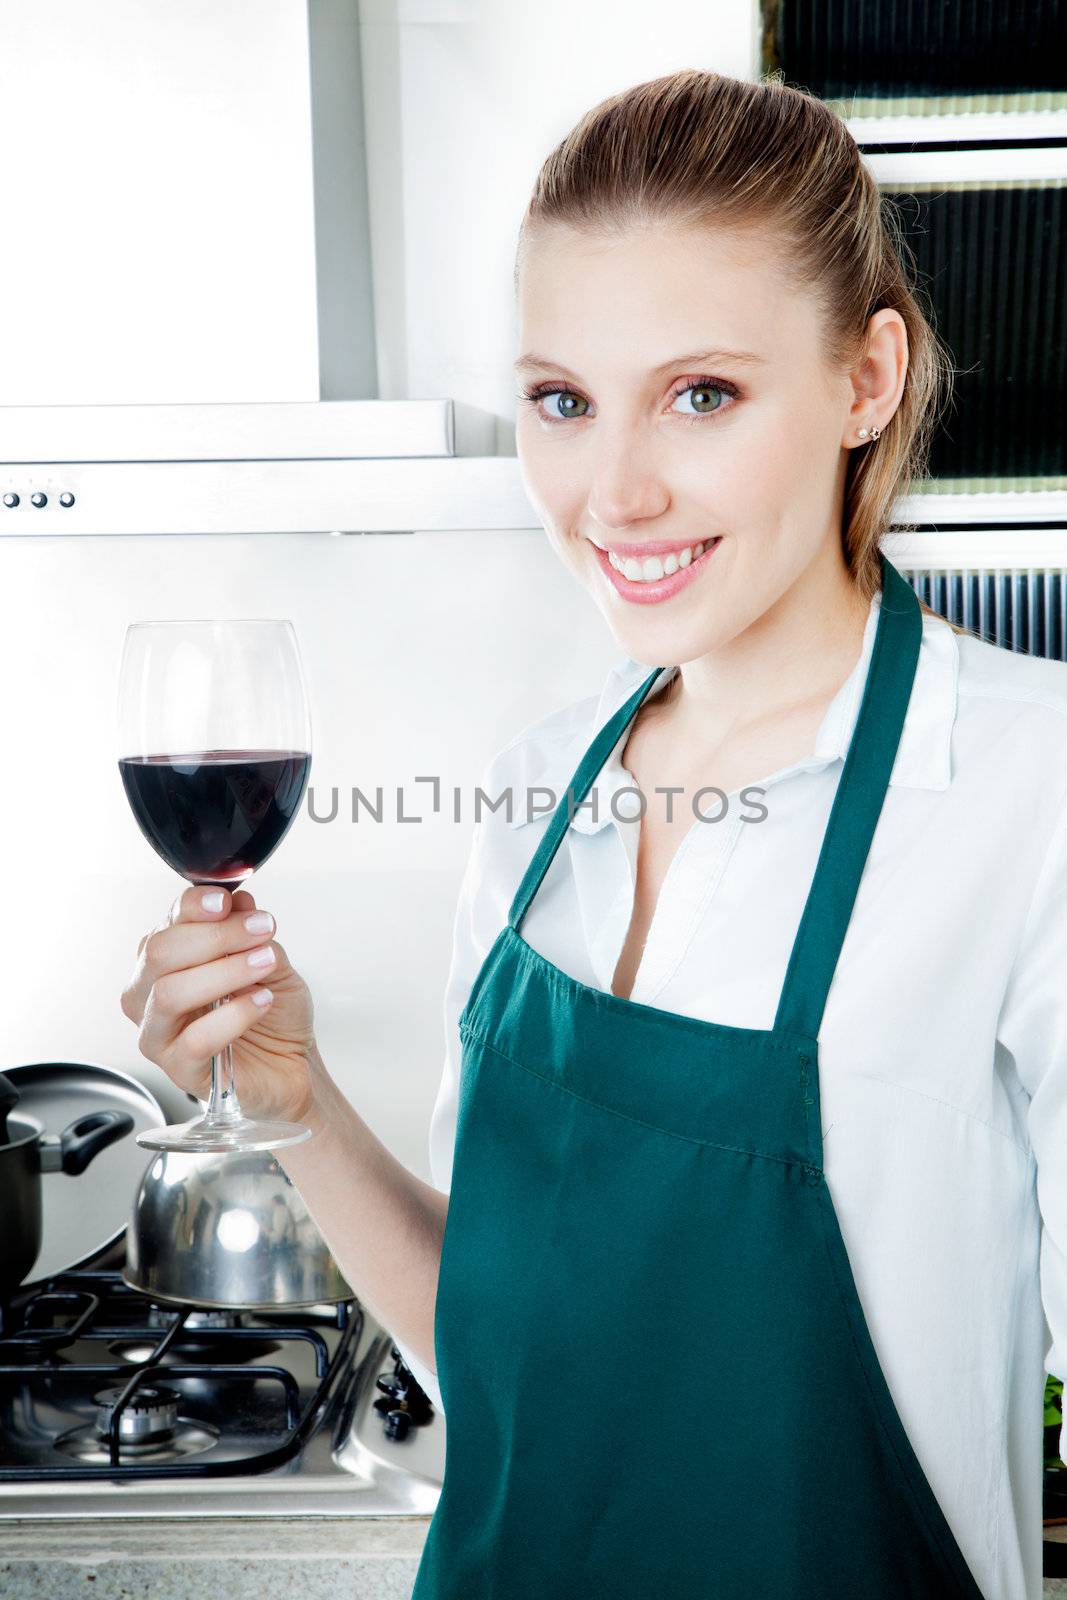 Pretty female blond woman in kitchen cooking with glass of red wine in hand